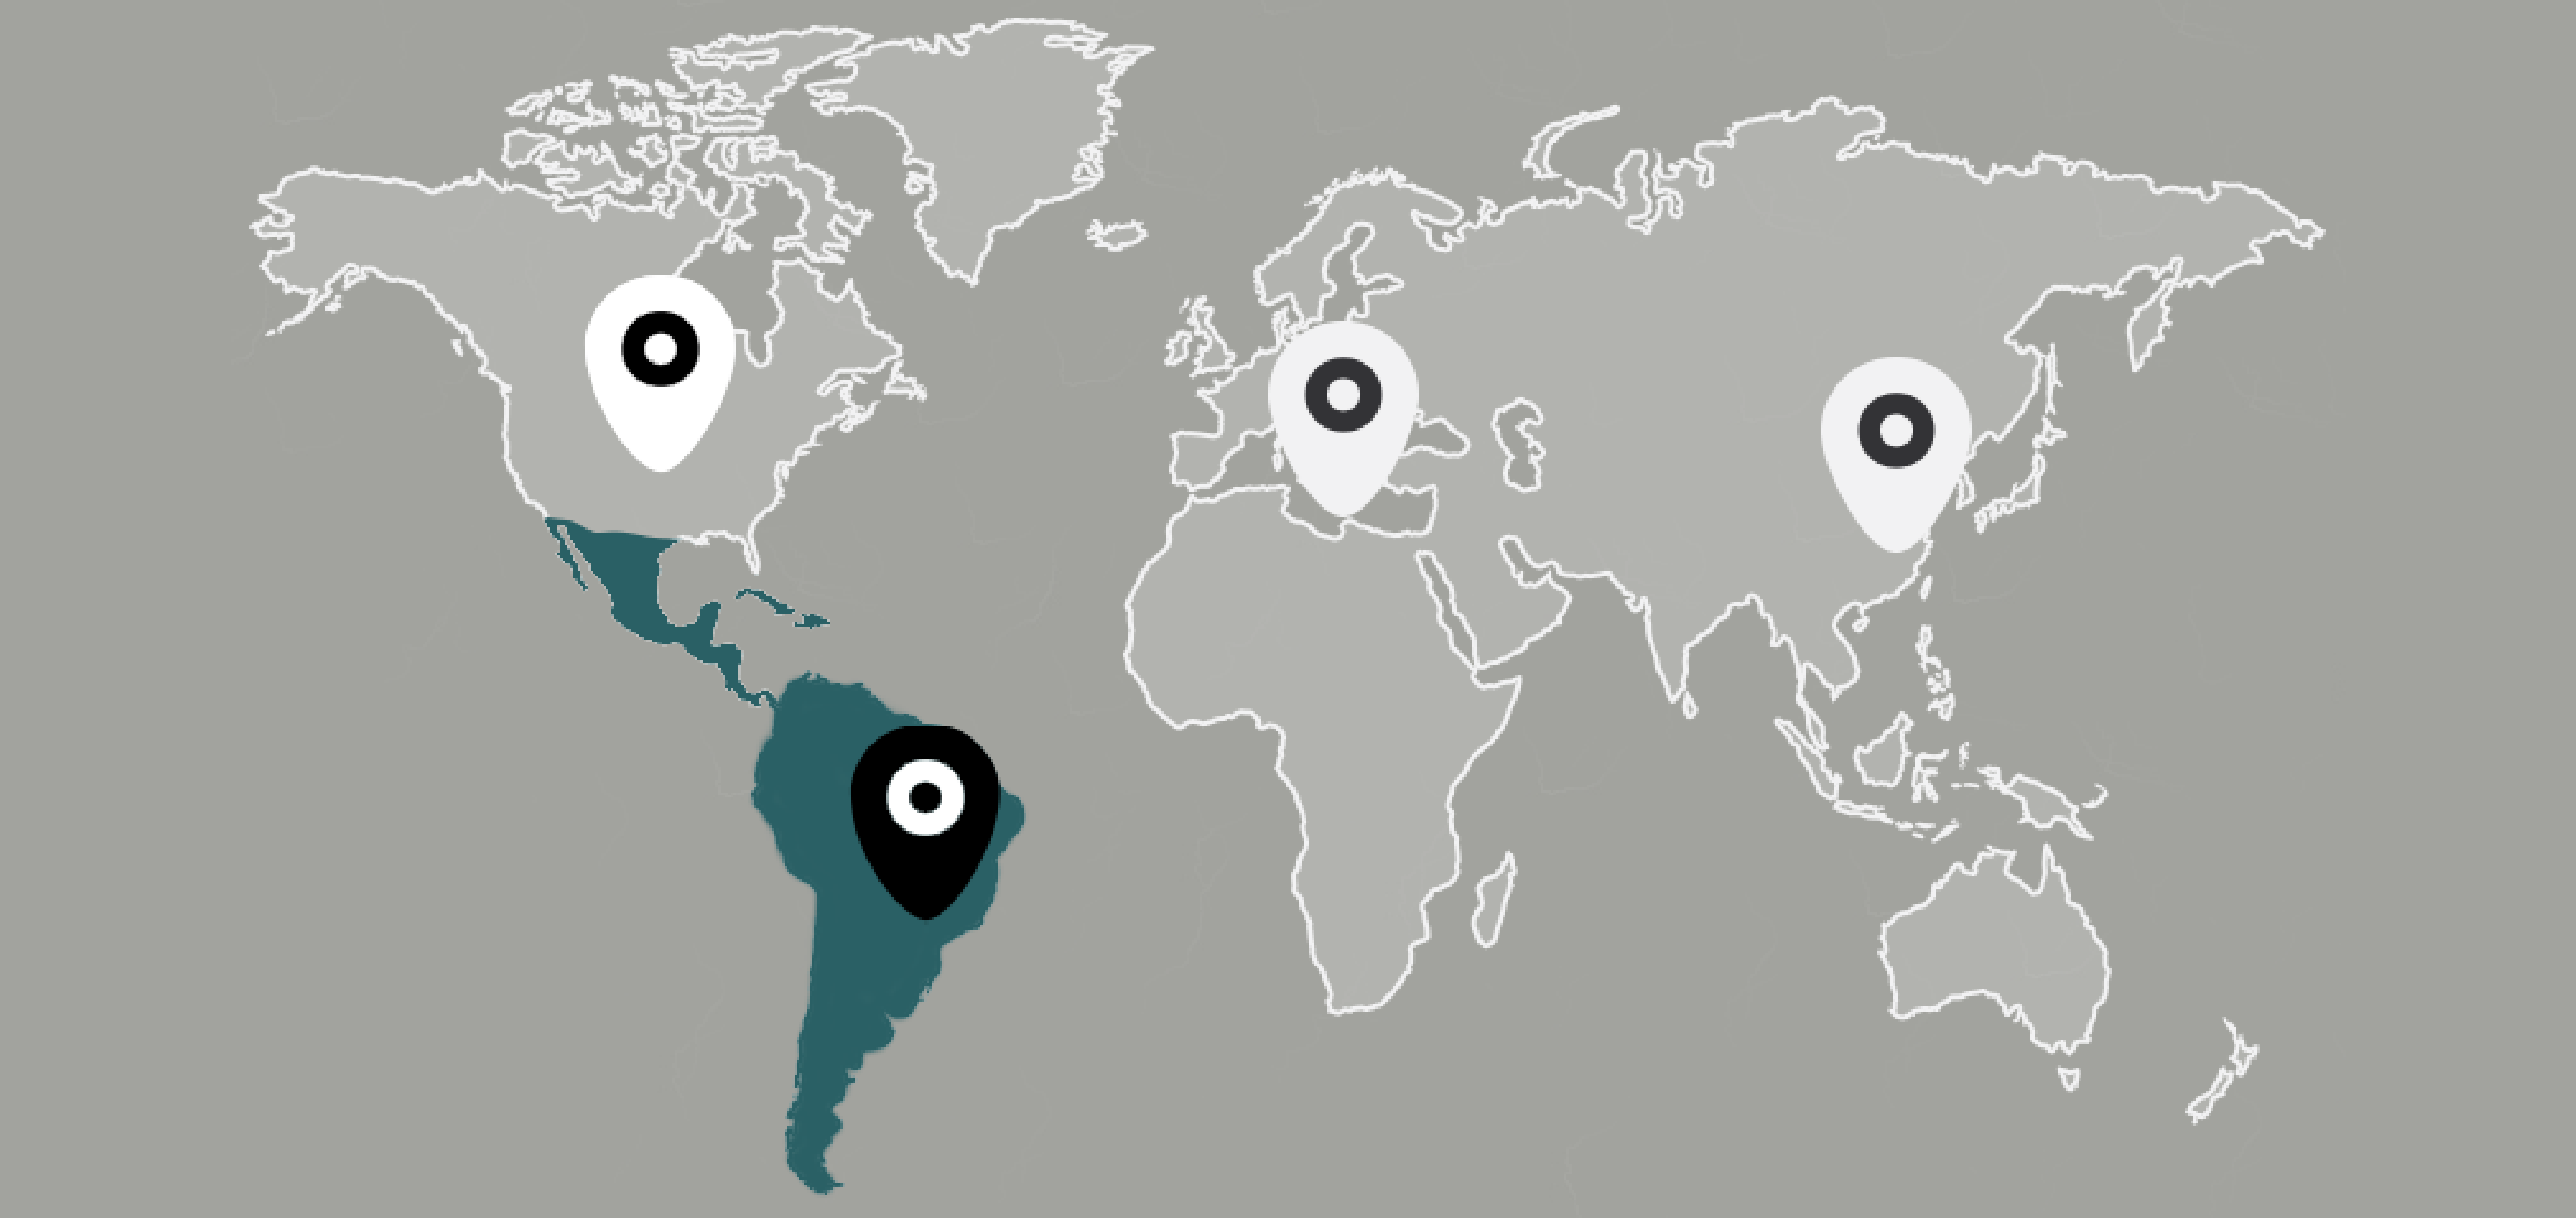 Olin Locations Latin and South America image